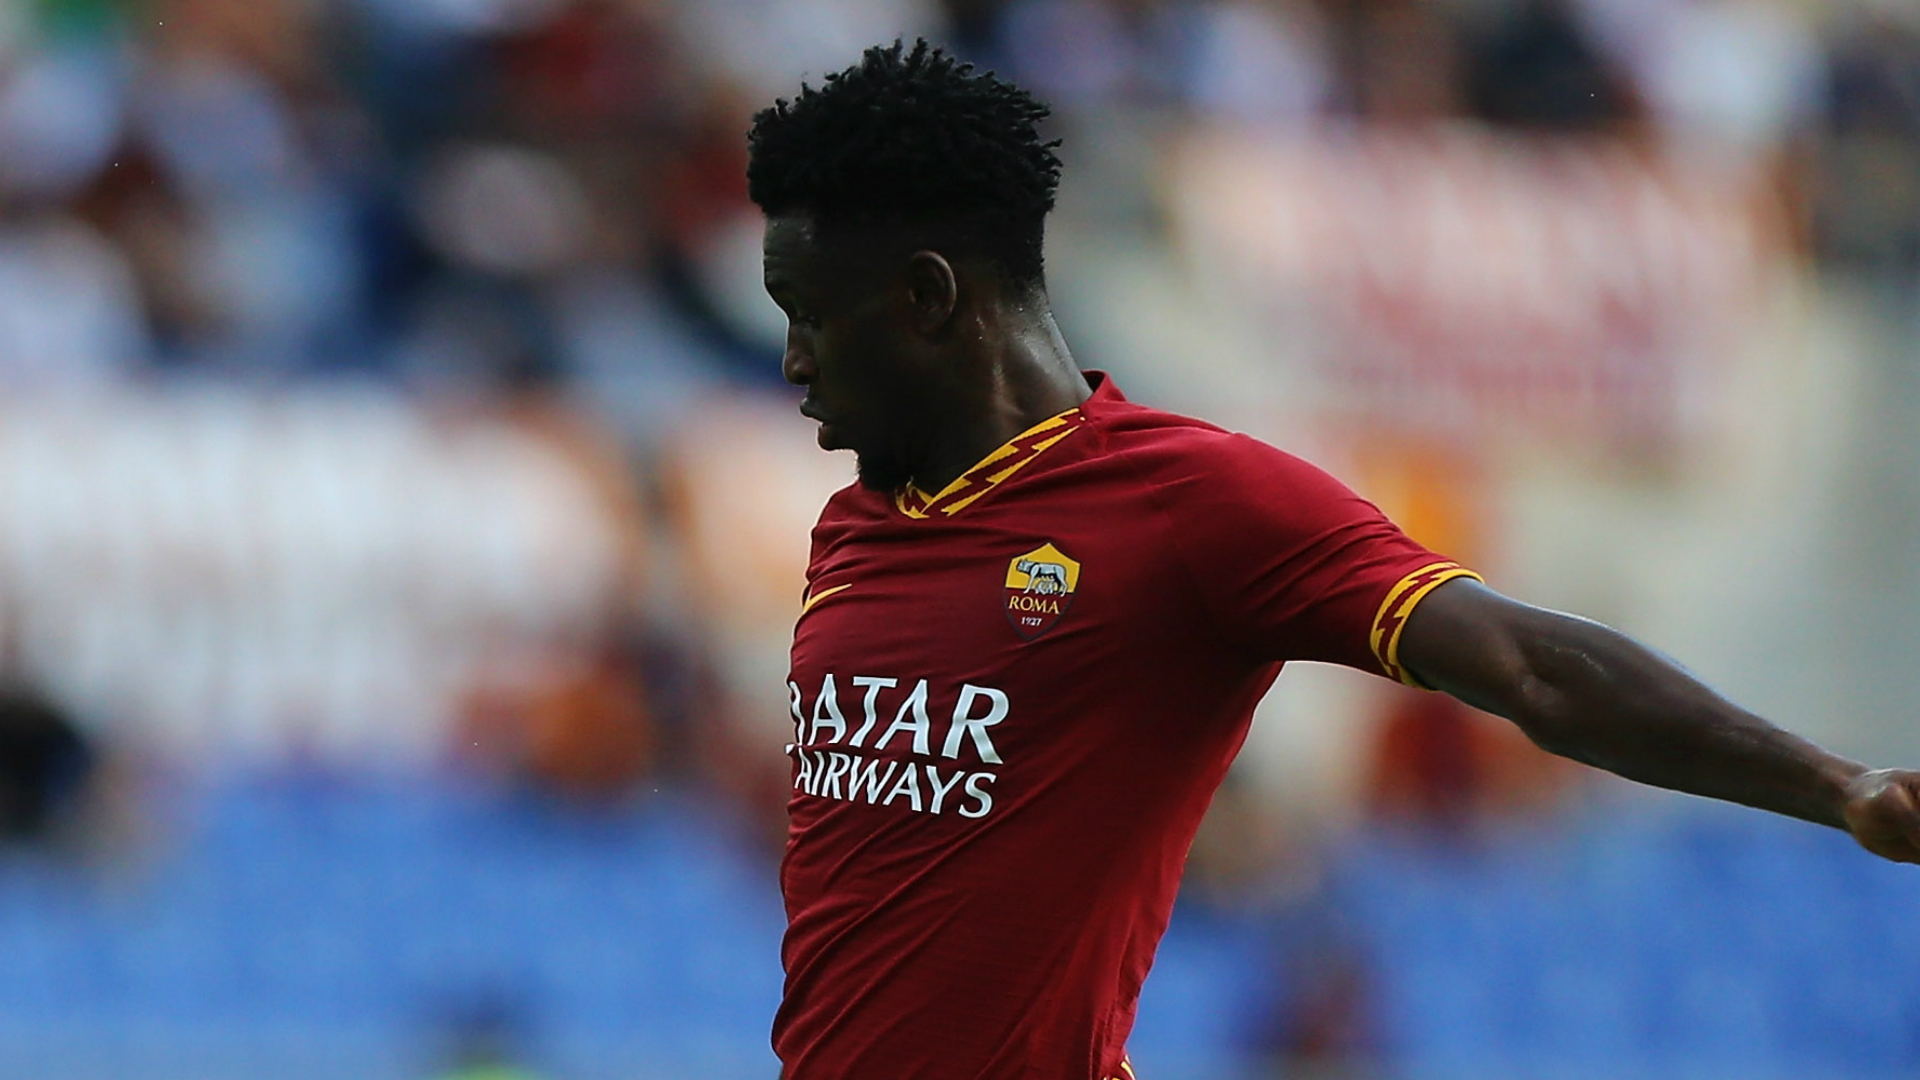 'We didn't have a great game' - Roma's Diawara regrets Wolfsberger draw